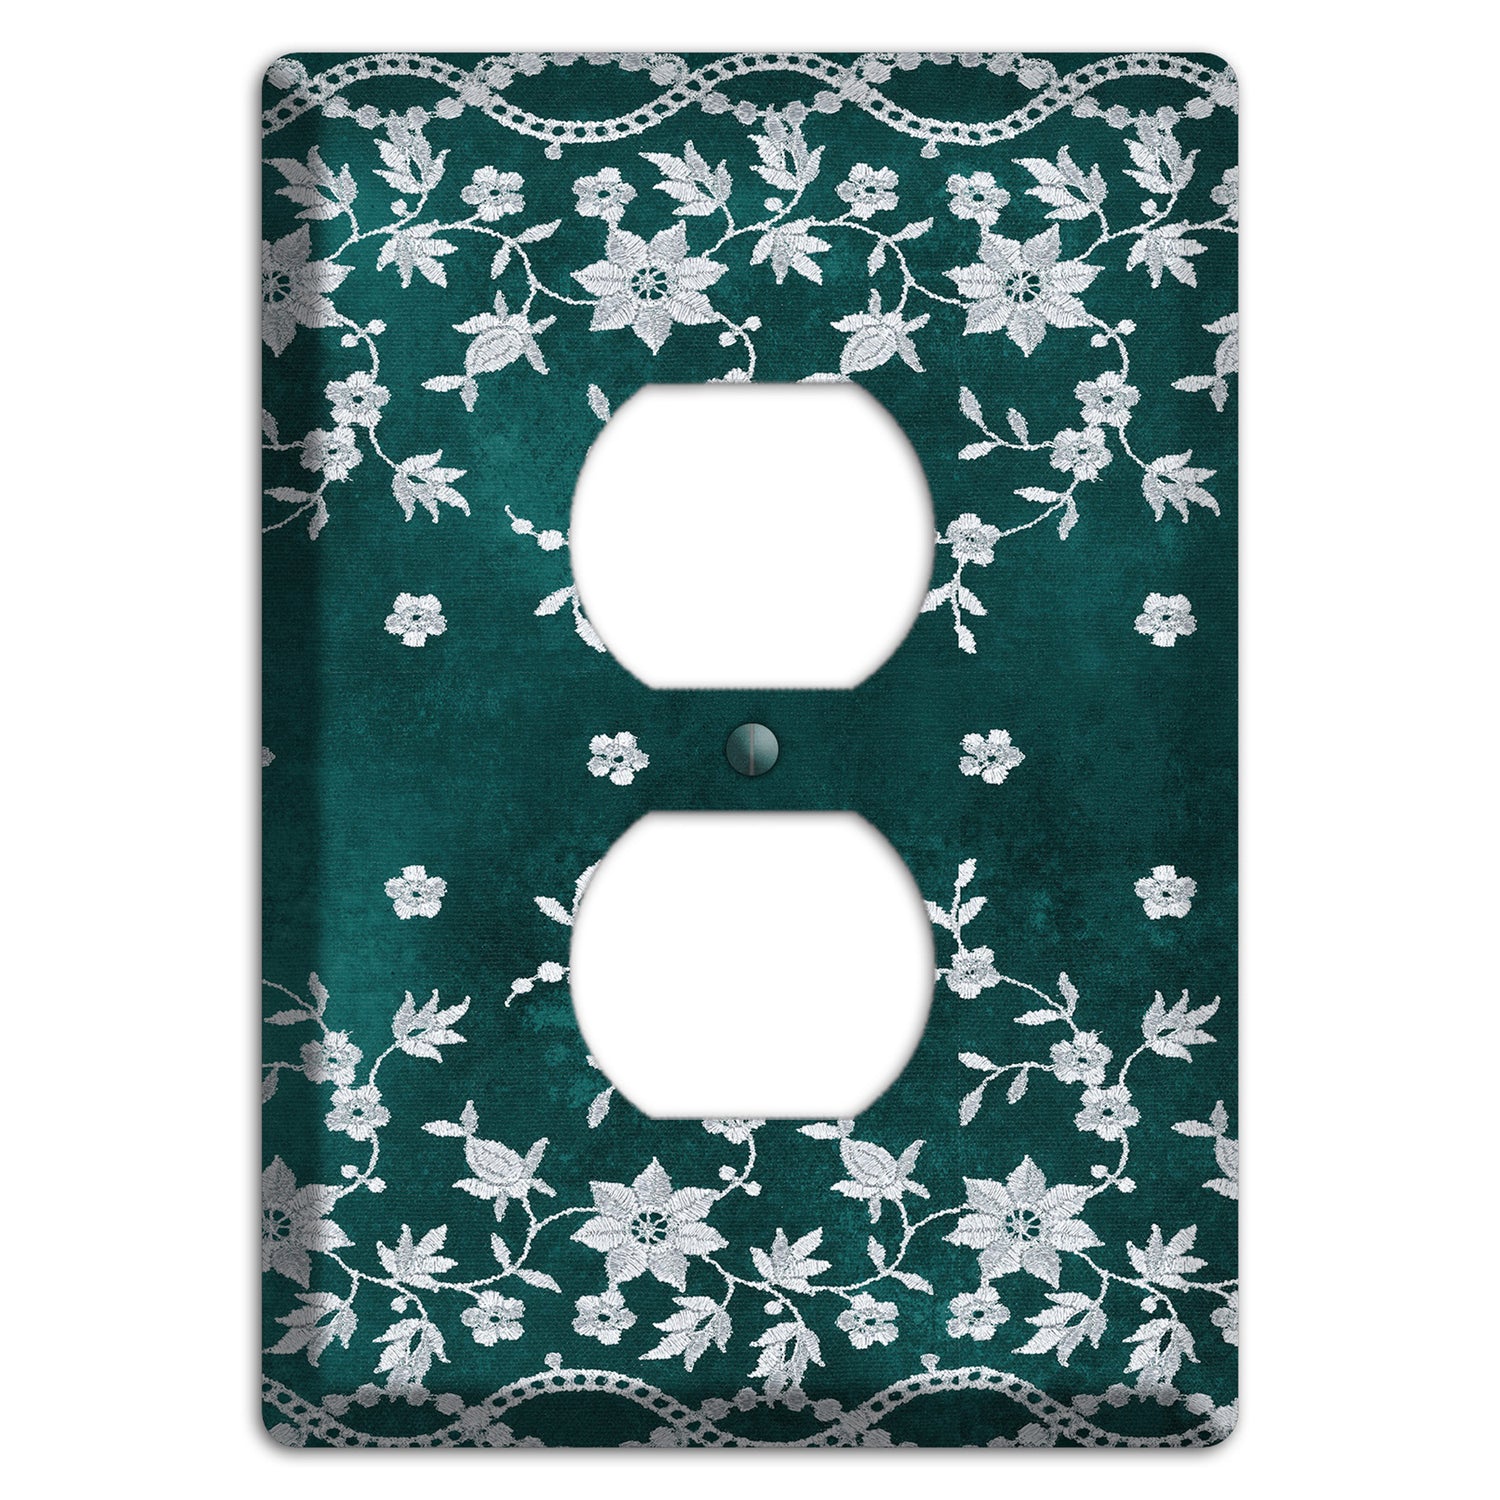 Embroidered Floral Teal Duplex Outlet Wallplate